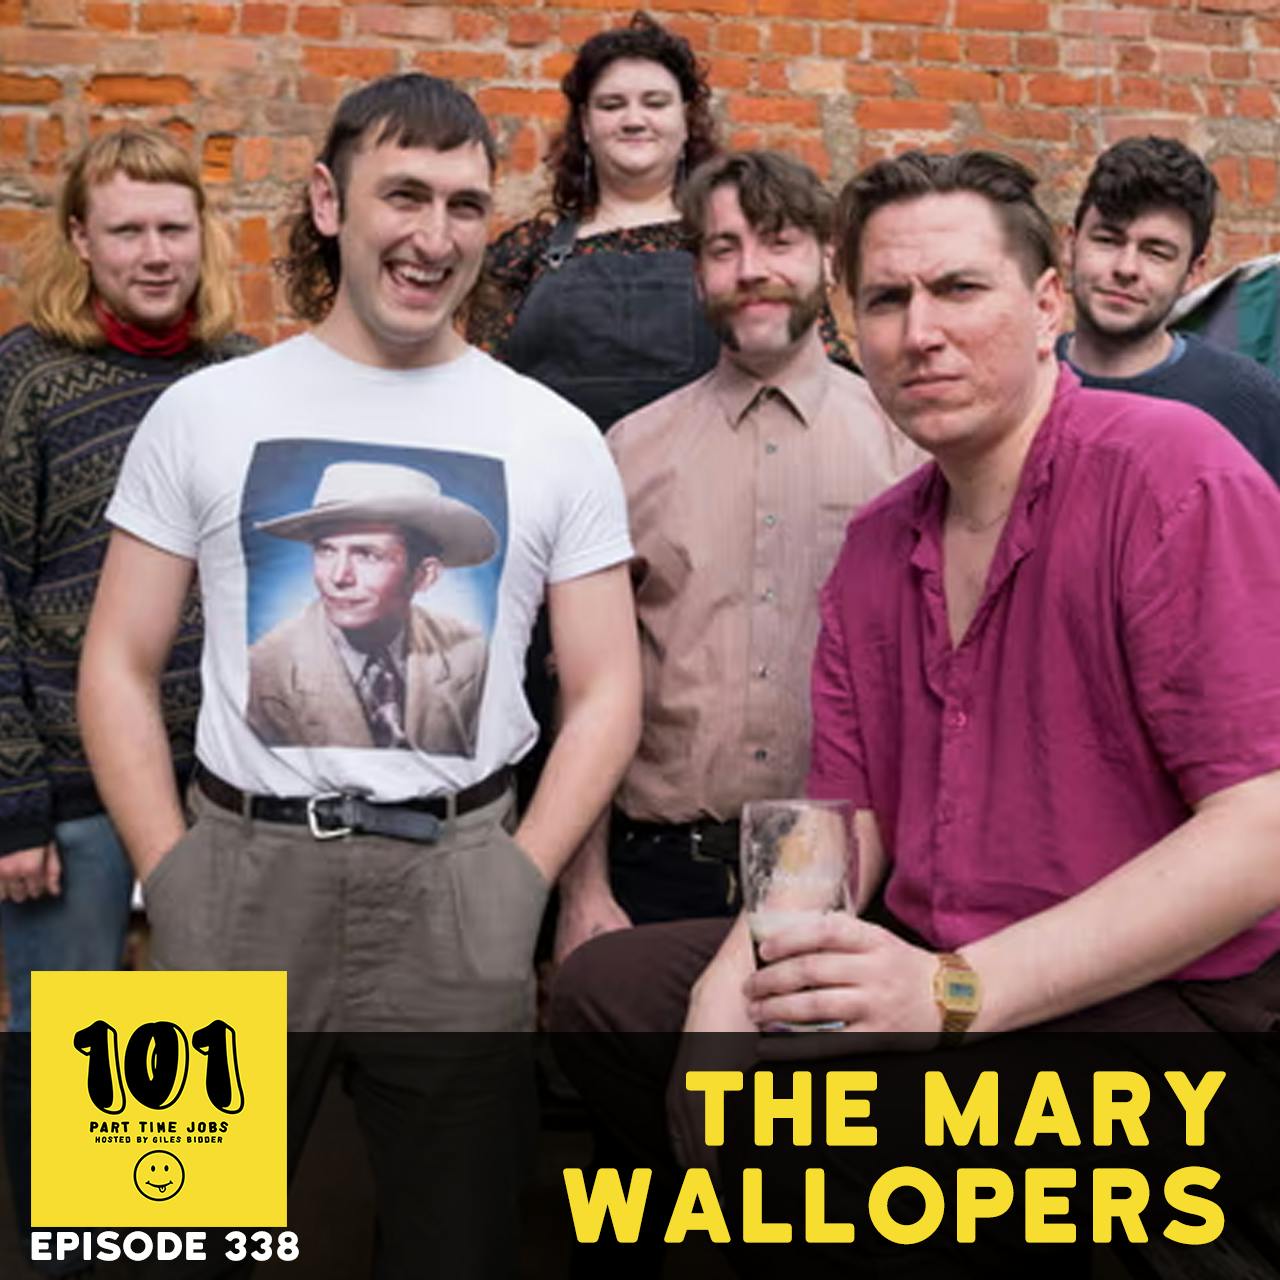 The Mary Wallopers - If you're willing to risk driving a stolen people carrier